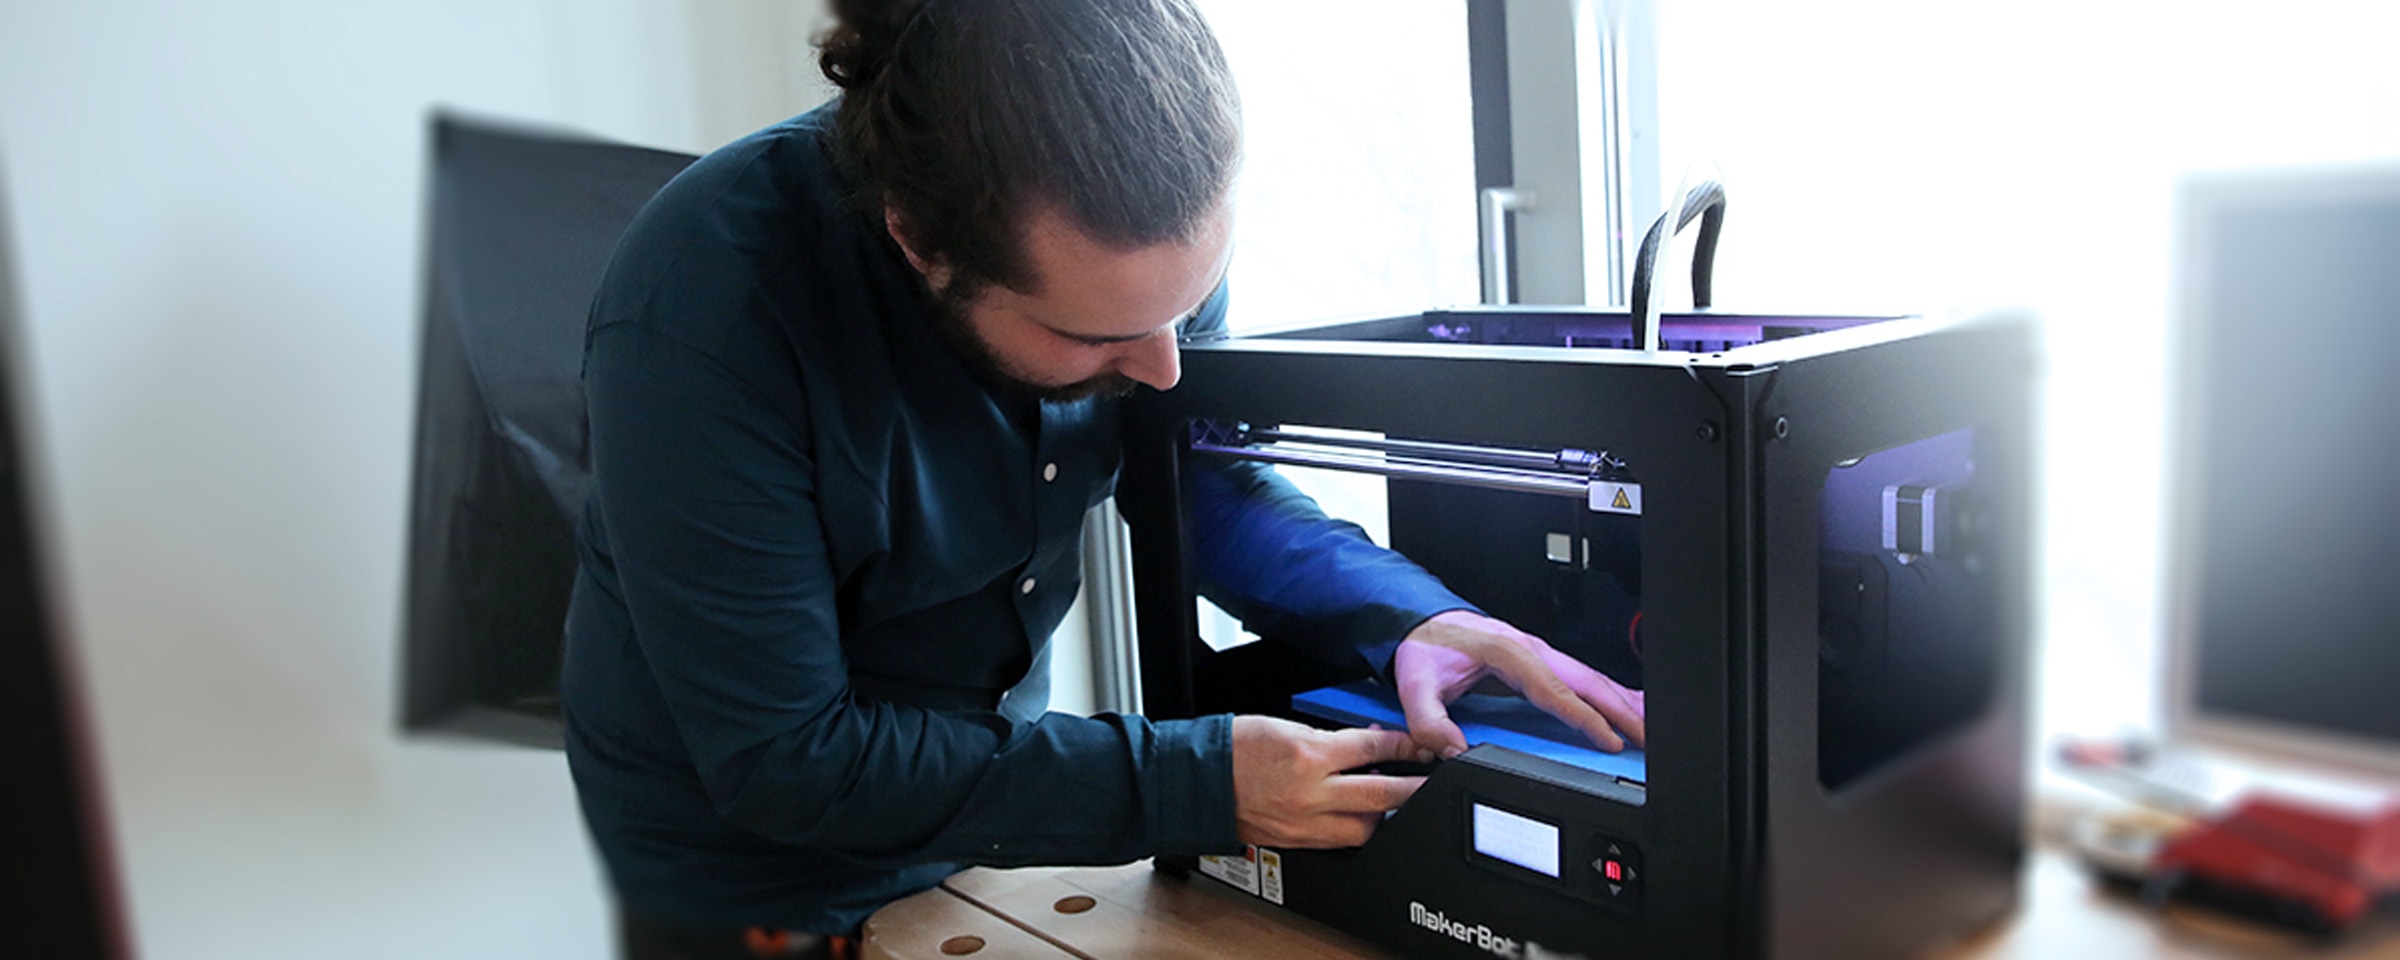 Intuity now has its own MakerBot